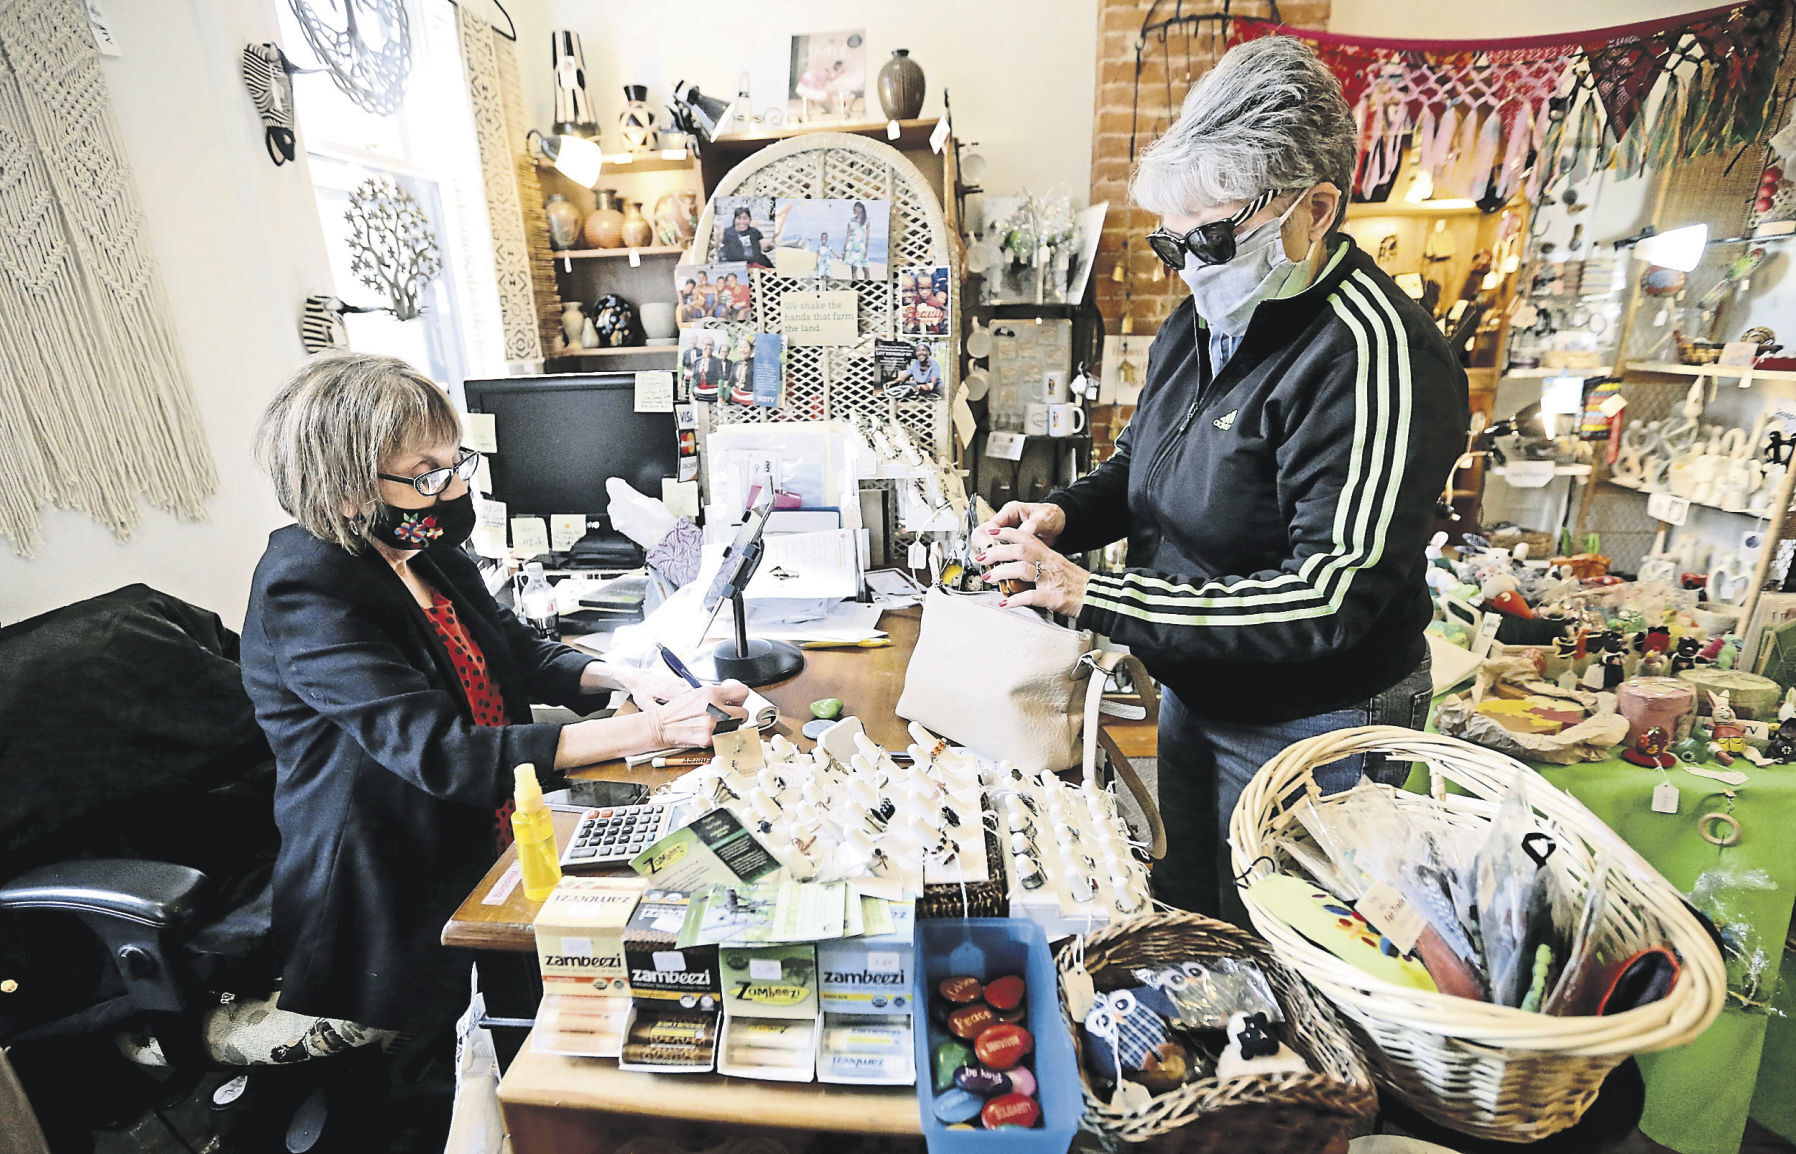 Owner Patty Jackson (left) talks with Dena Grutz, of Platteville, Wis., at A Ripple Effect. PHOTO CREDIT: Jessica Reilly